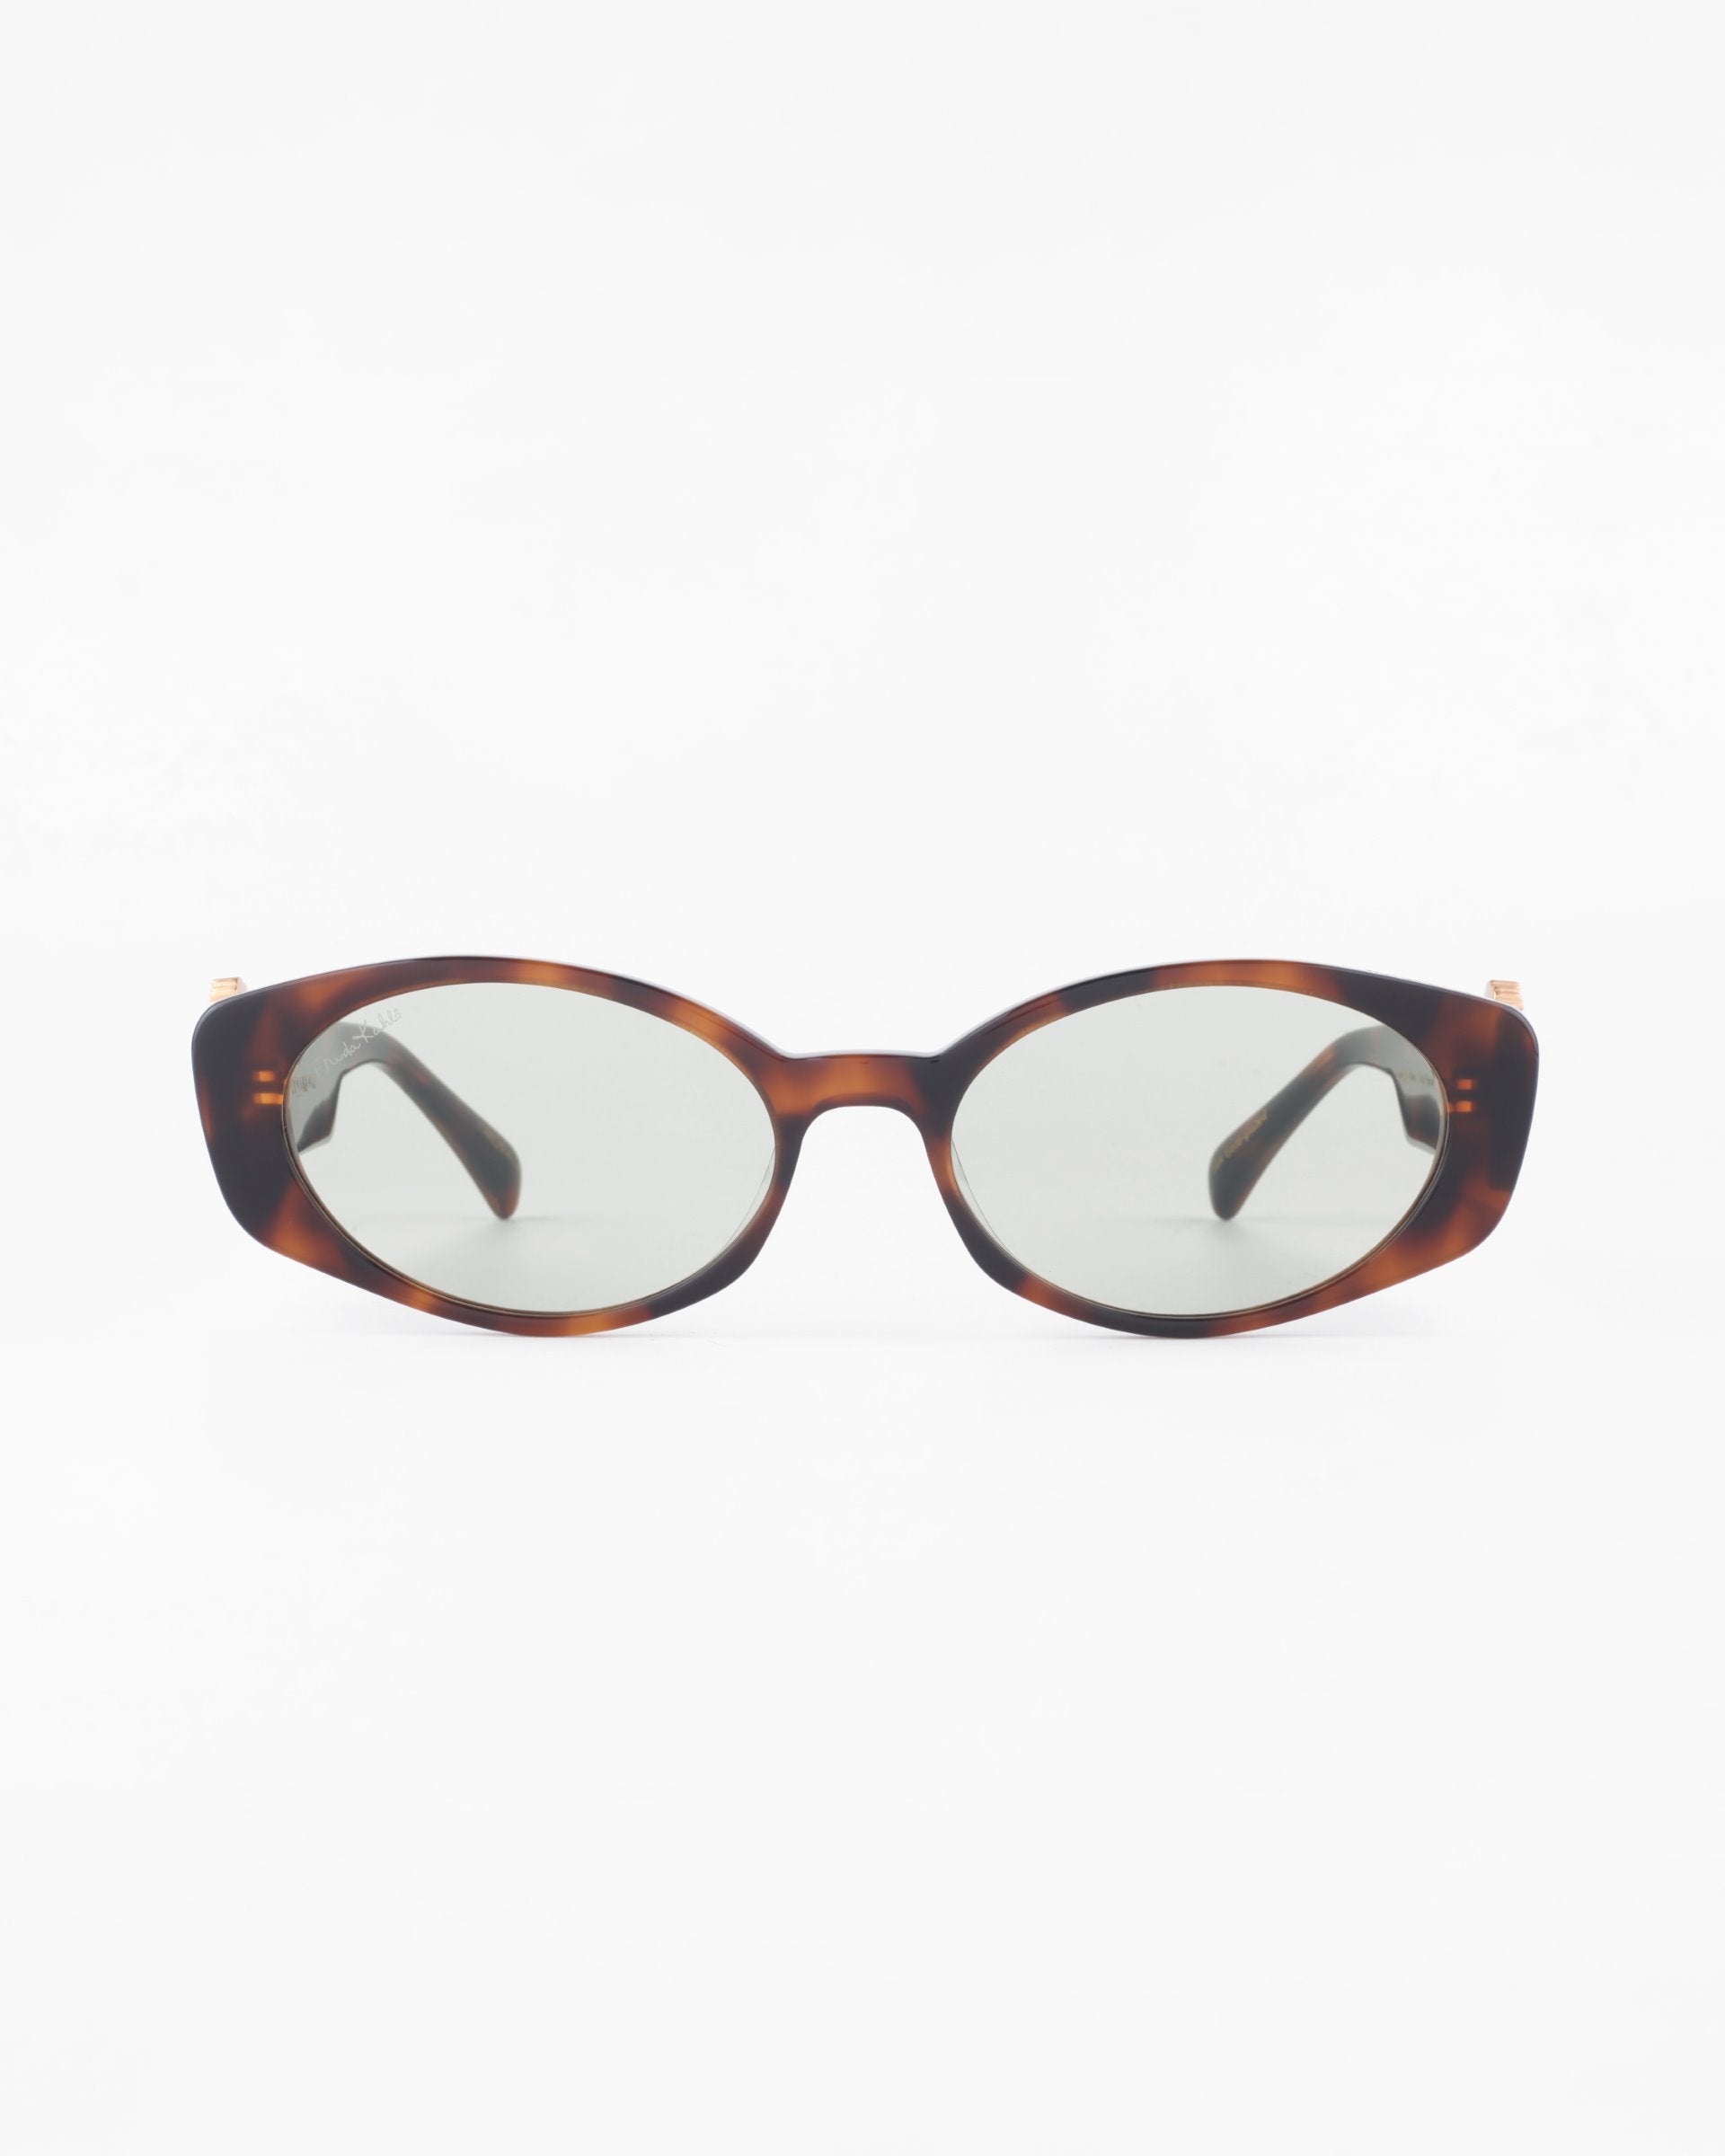 A pair of For Art's Sake® Frida Portrait sunglasses with brown tortoiseshell frames and ultra-lightweight Nylon lenses, offering 100% UVA & UVB protection. The dark-tinted lenses complement the frames and are positioned facing forward against a plain white background.